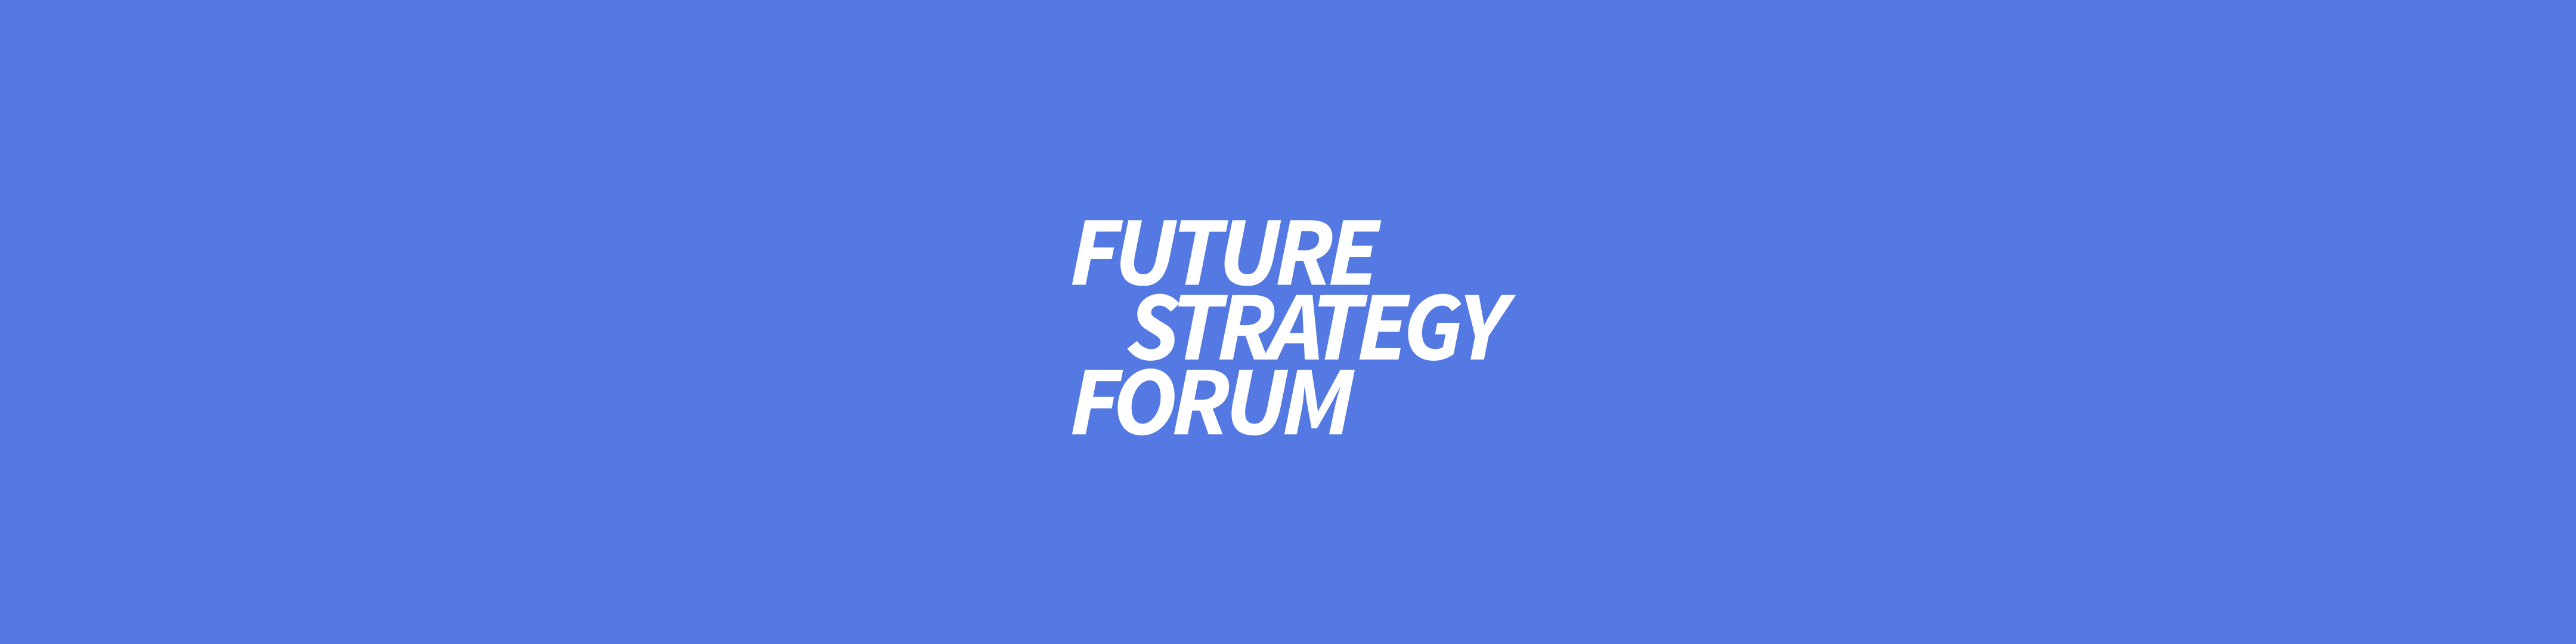 Future Strategy Forum presented by CSIS